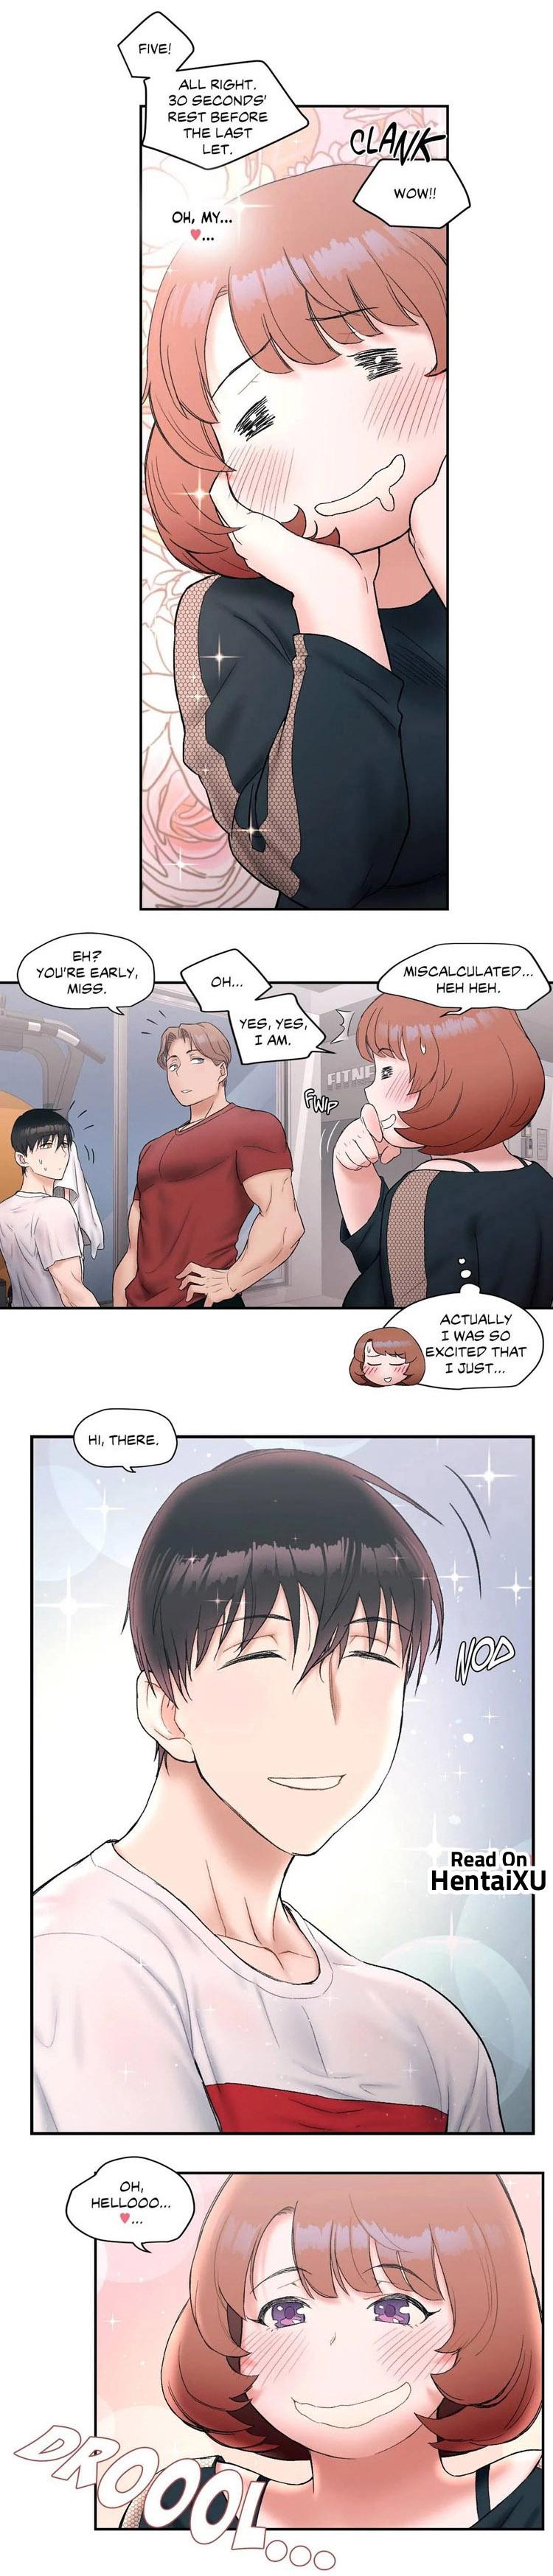 Sexercise Ch.14/? 137